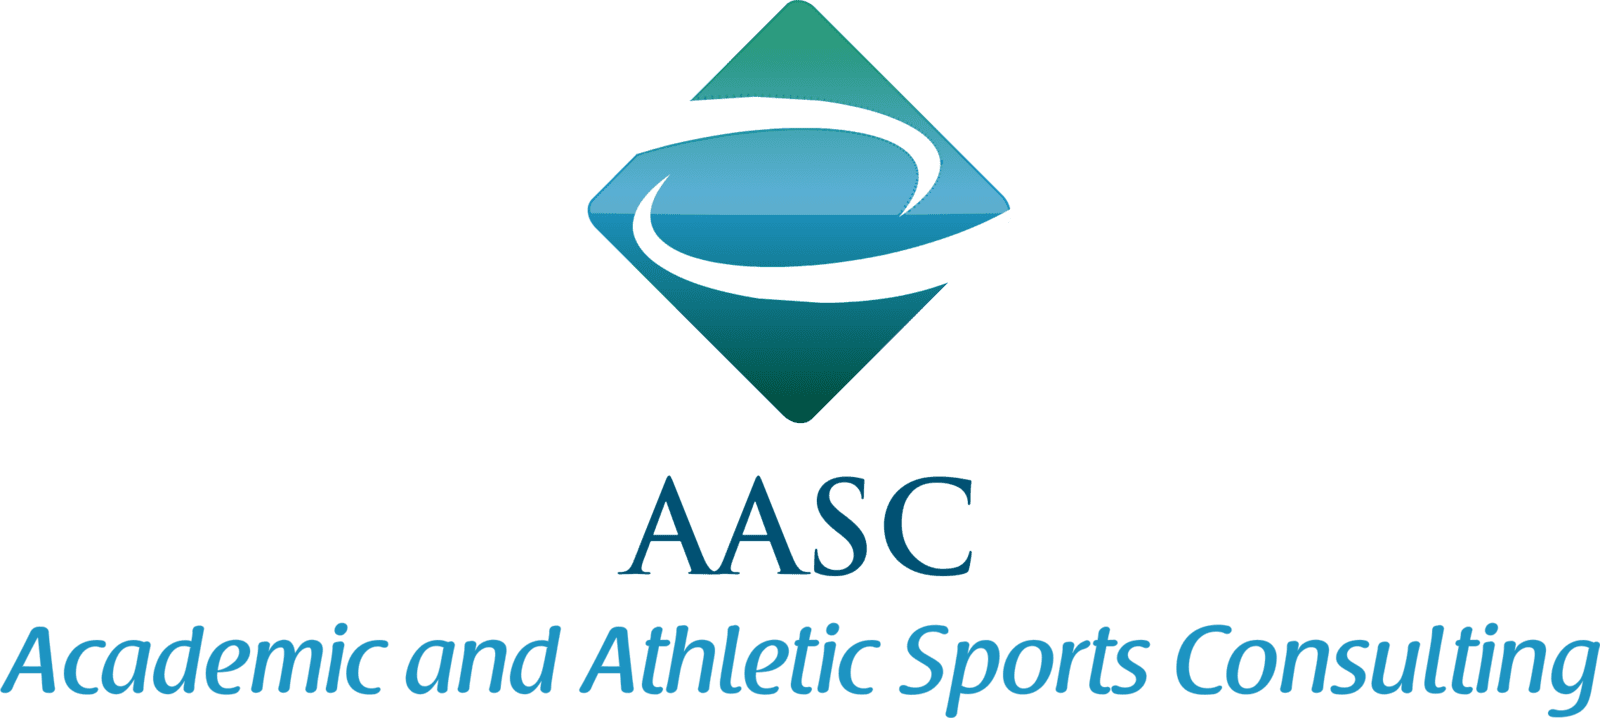 Academic and Athletic Sports Consulting